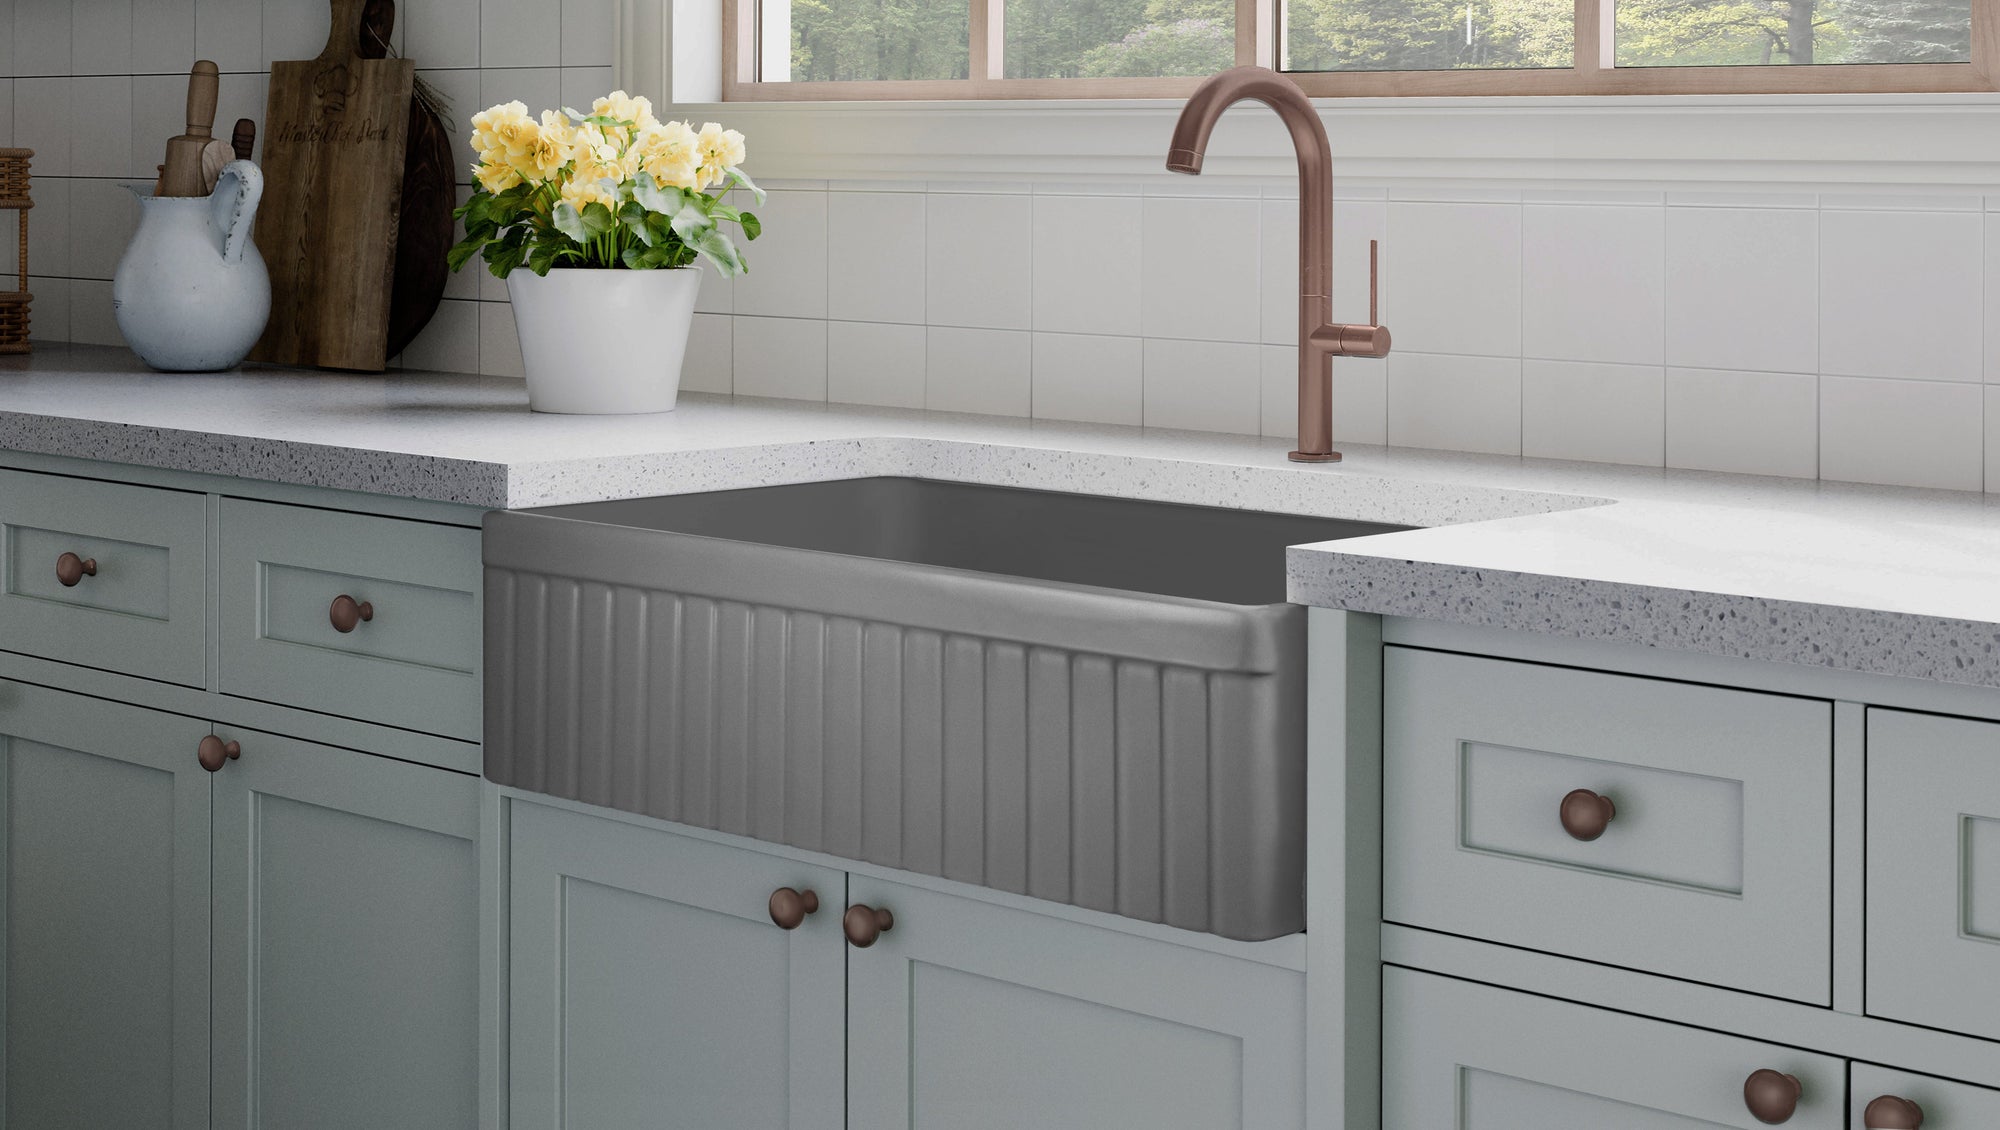 FSW1047AC LUX 33-INCH SOLID FIRECLAY FARMHOUSE SINK, MATTE GRAY, ANTIQUE COPPER ACCS, FLUTED FRONT